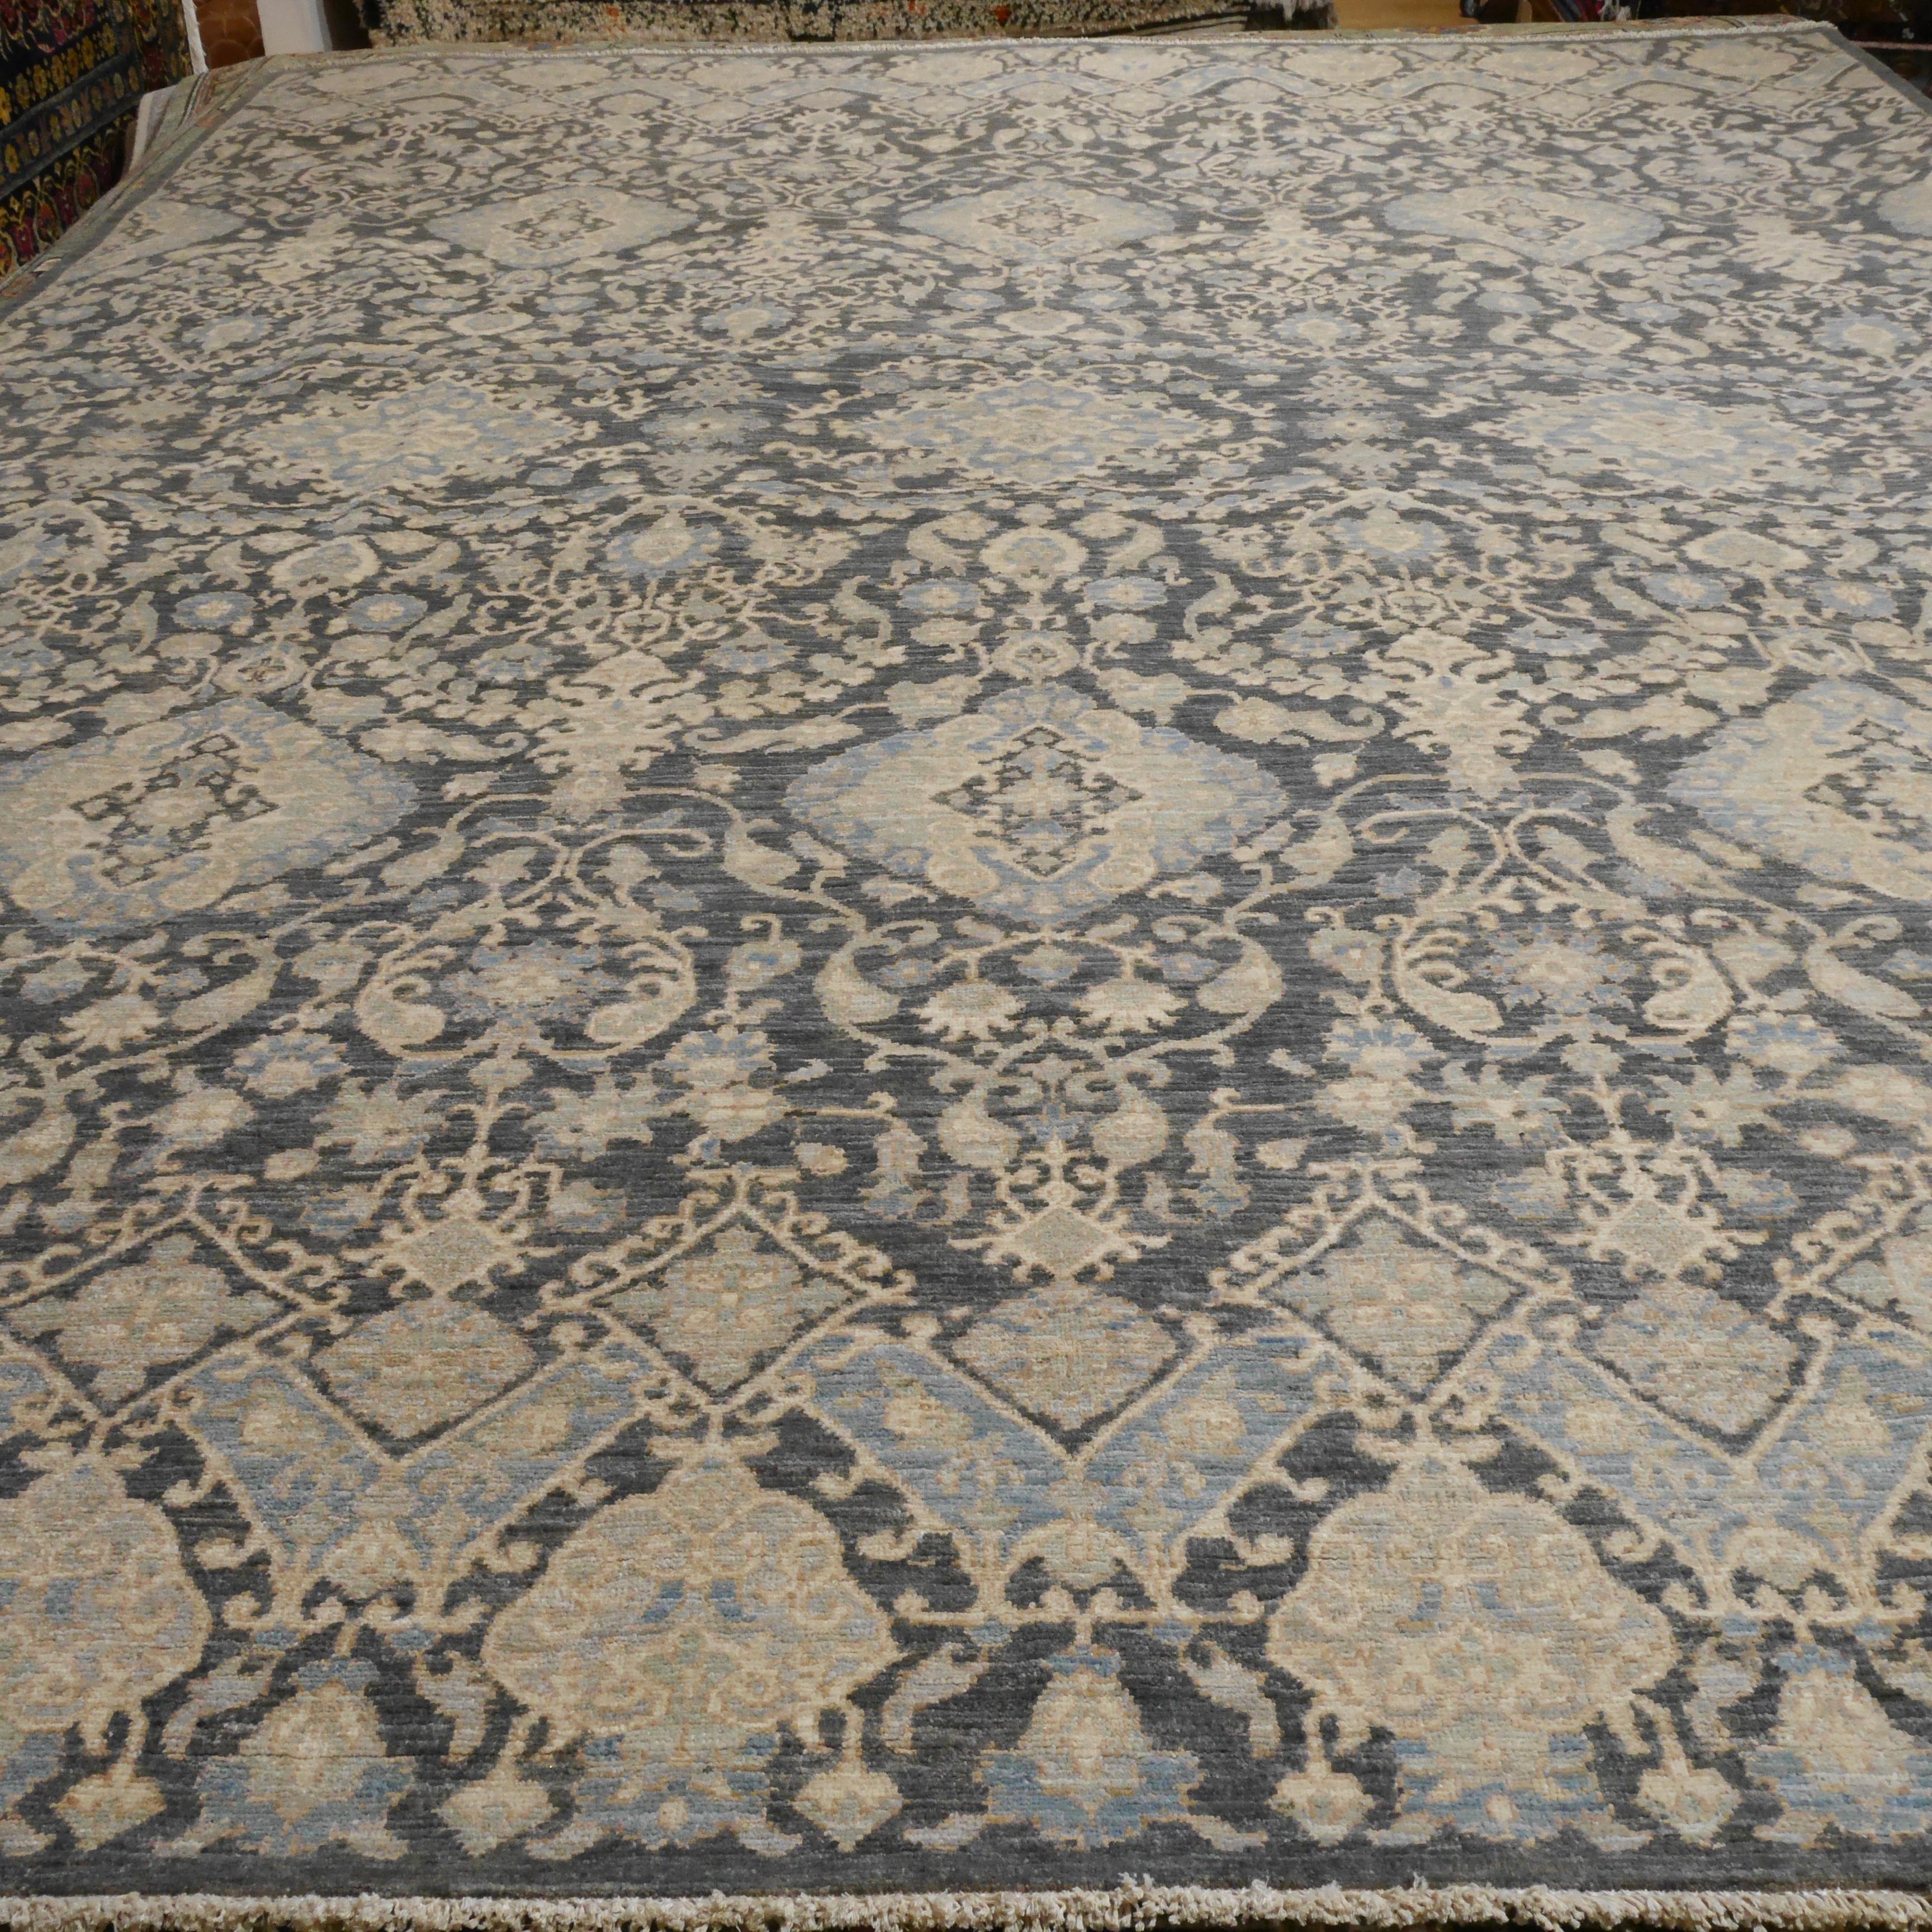 A large room sized rug with design in style of Agra.
This beautiful rug was hand knotted to fit 21st century interior needs. The background is in an elegant gray color with oriental designs.
Agra design rugs are very looked after since they go